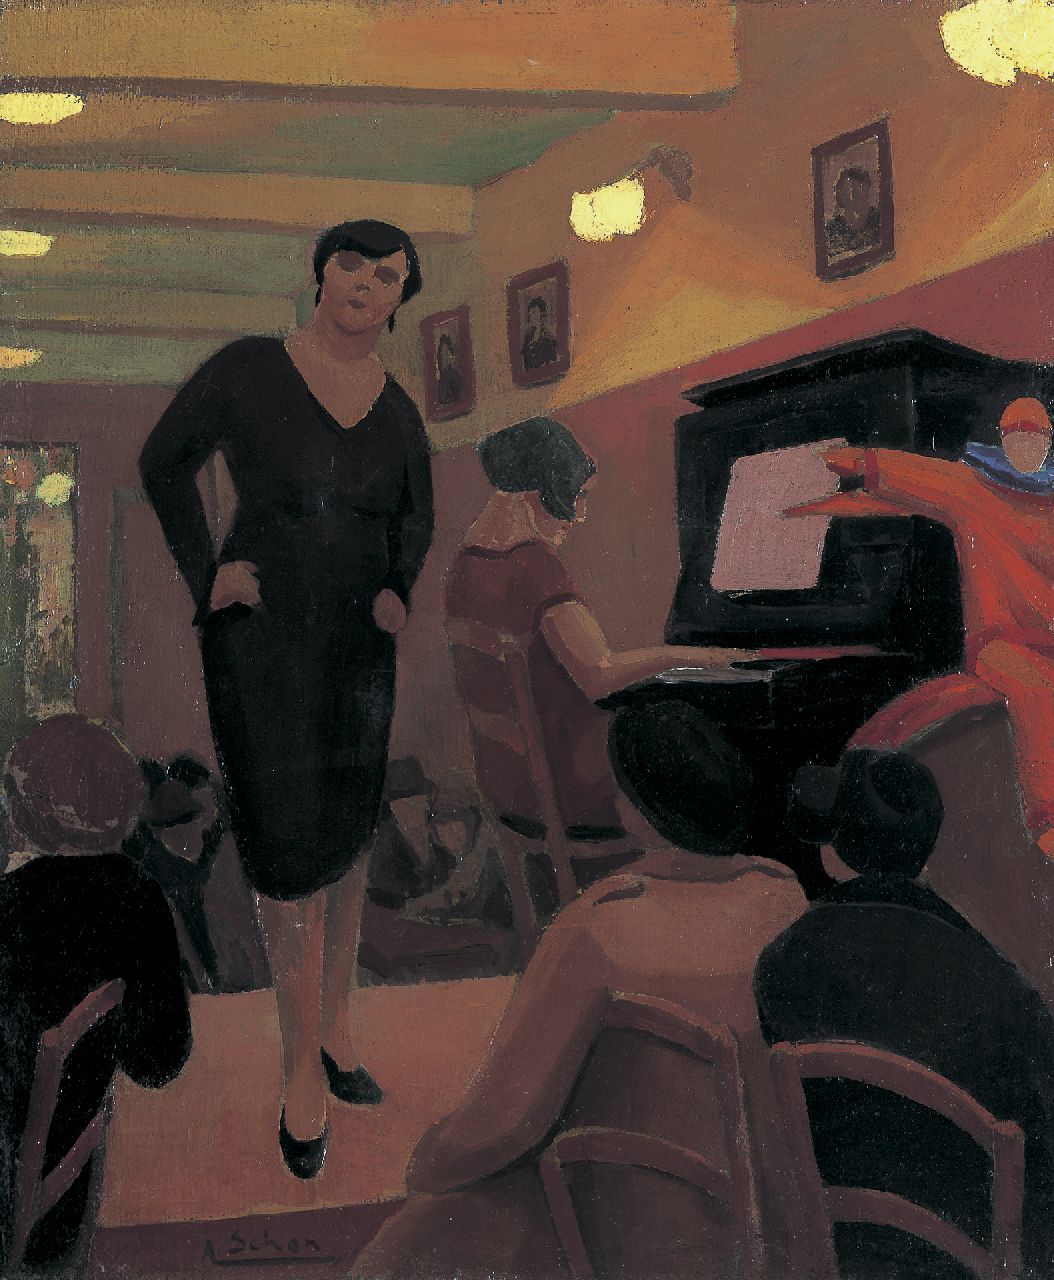 Schön A.  | Arthur Schön | Paintings offered for sale | Cabaret, oil on canvas 60.5 x 50.5 cm, signed l.l. and dated 1928 on reverse